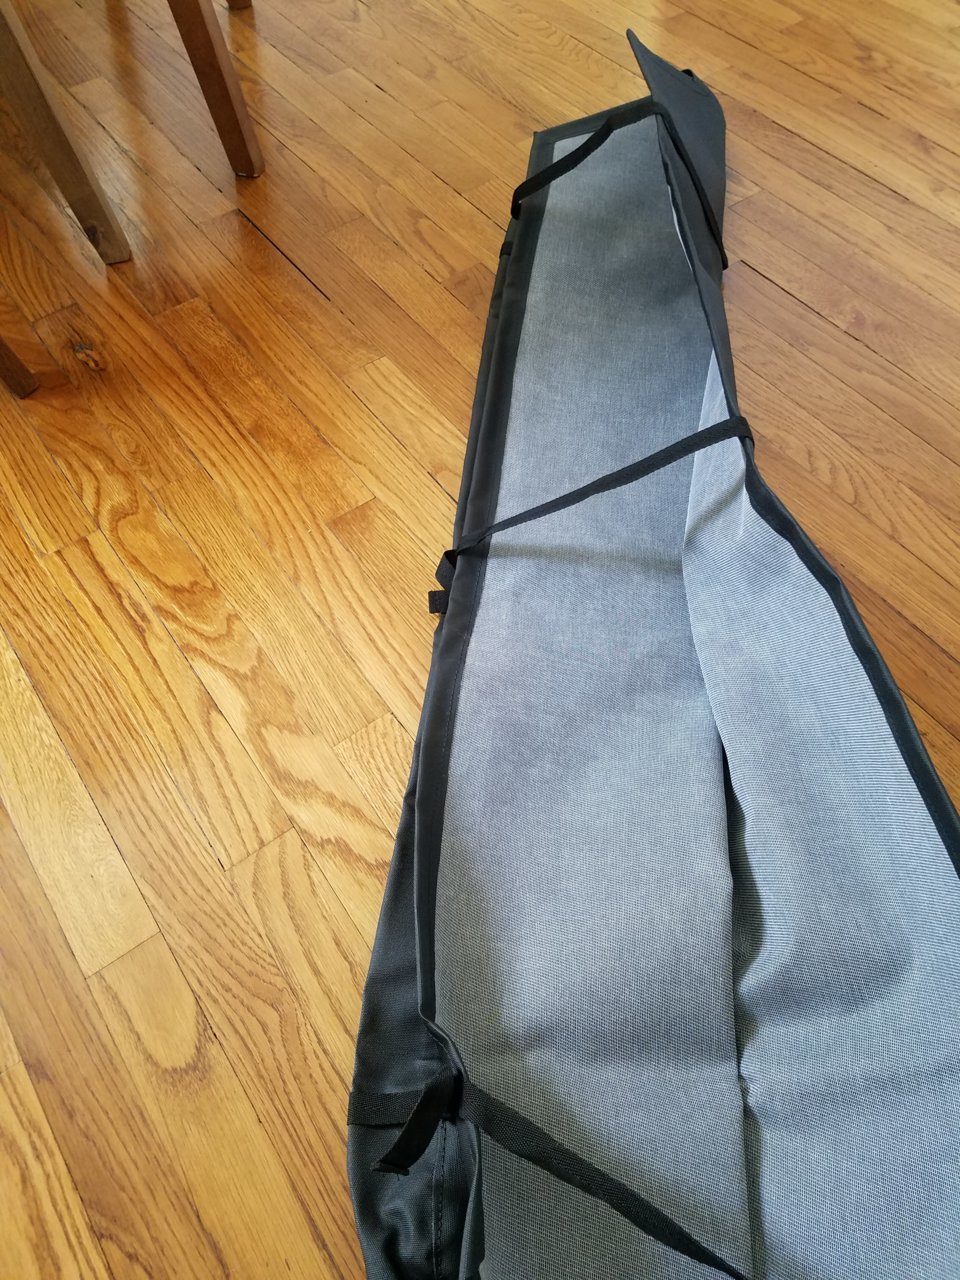 6' Softopper Boot Cover/Storage Bag | Tacoma World